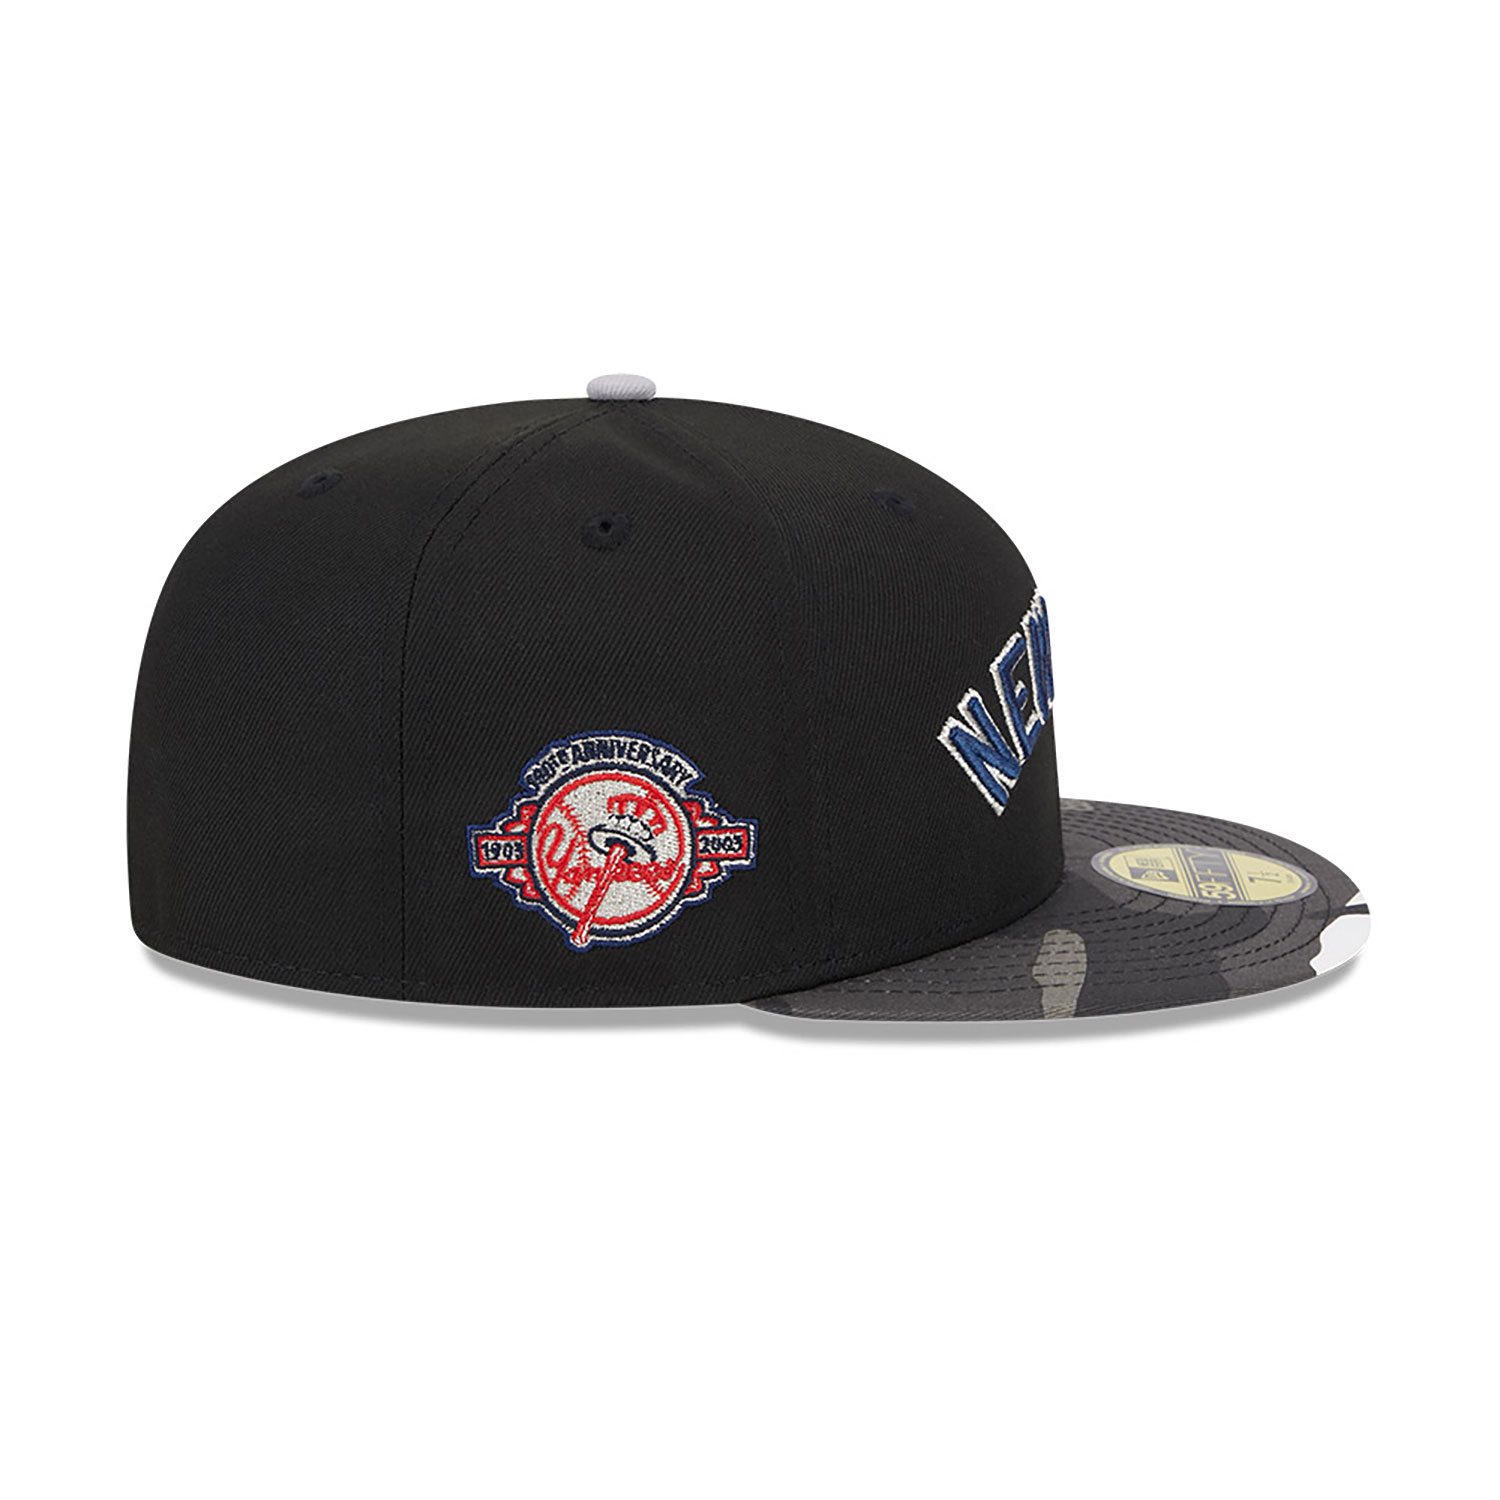 New York Yankees Metallic Camo Black 59FIFTY Fitted Cap